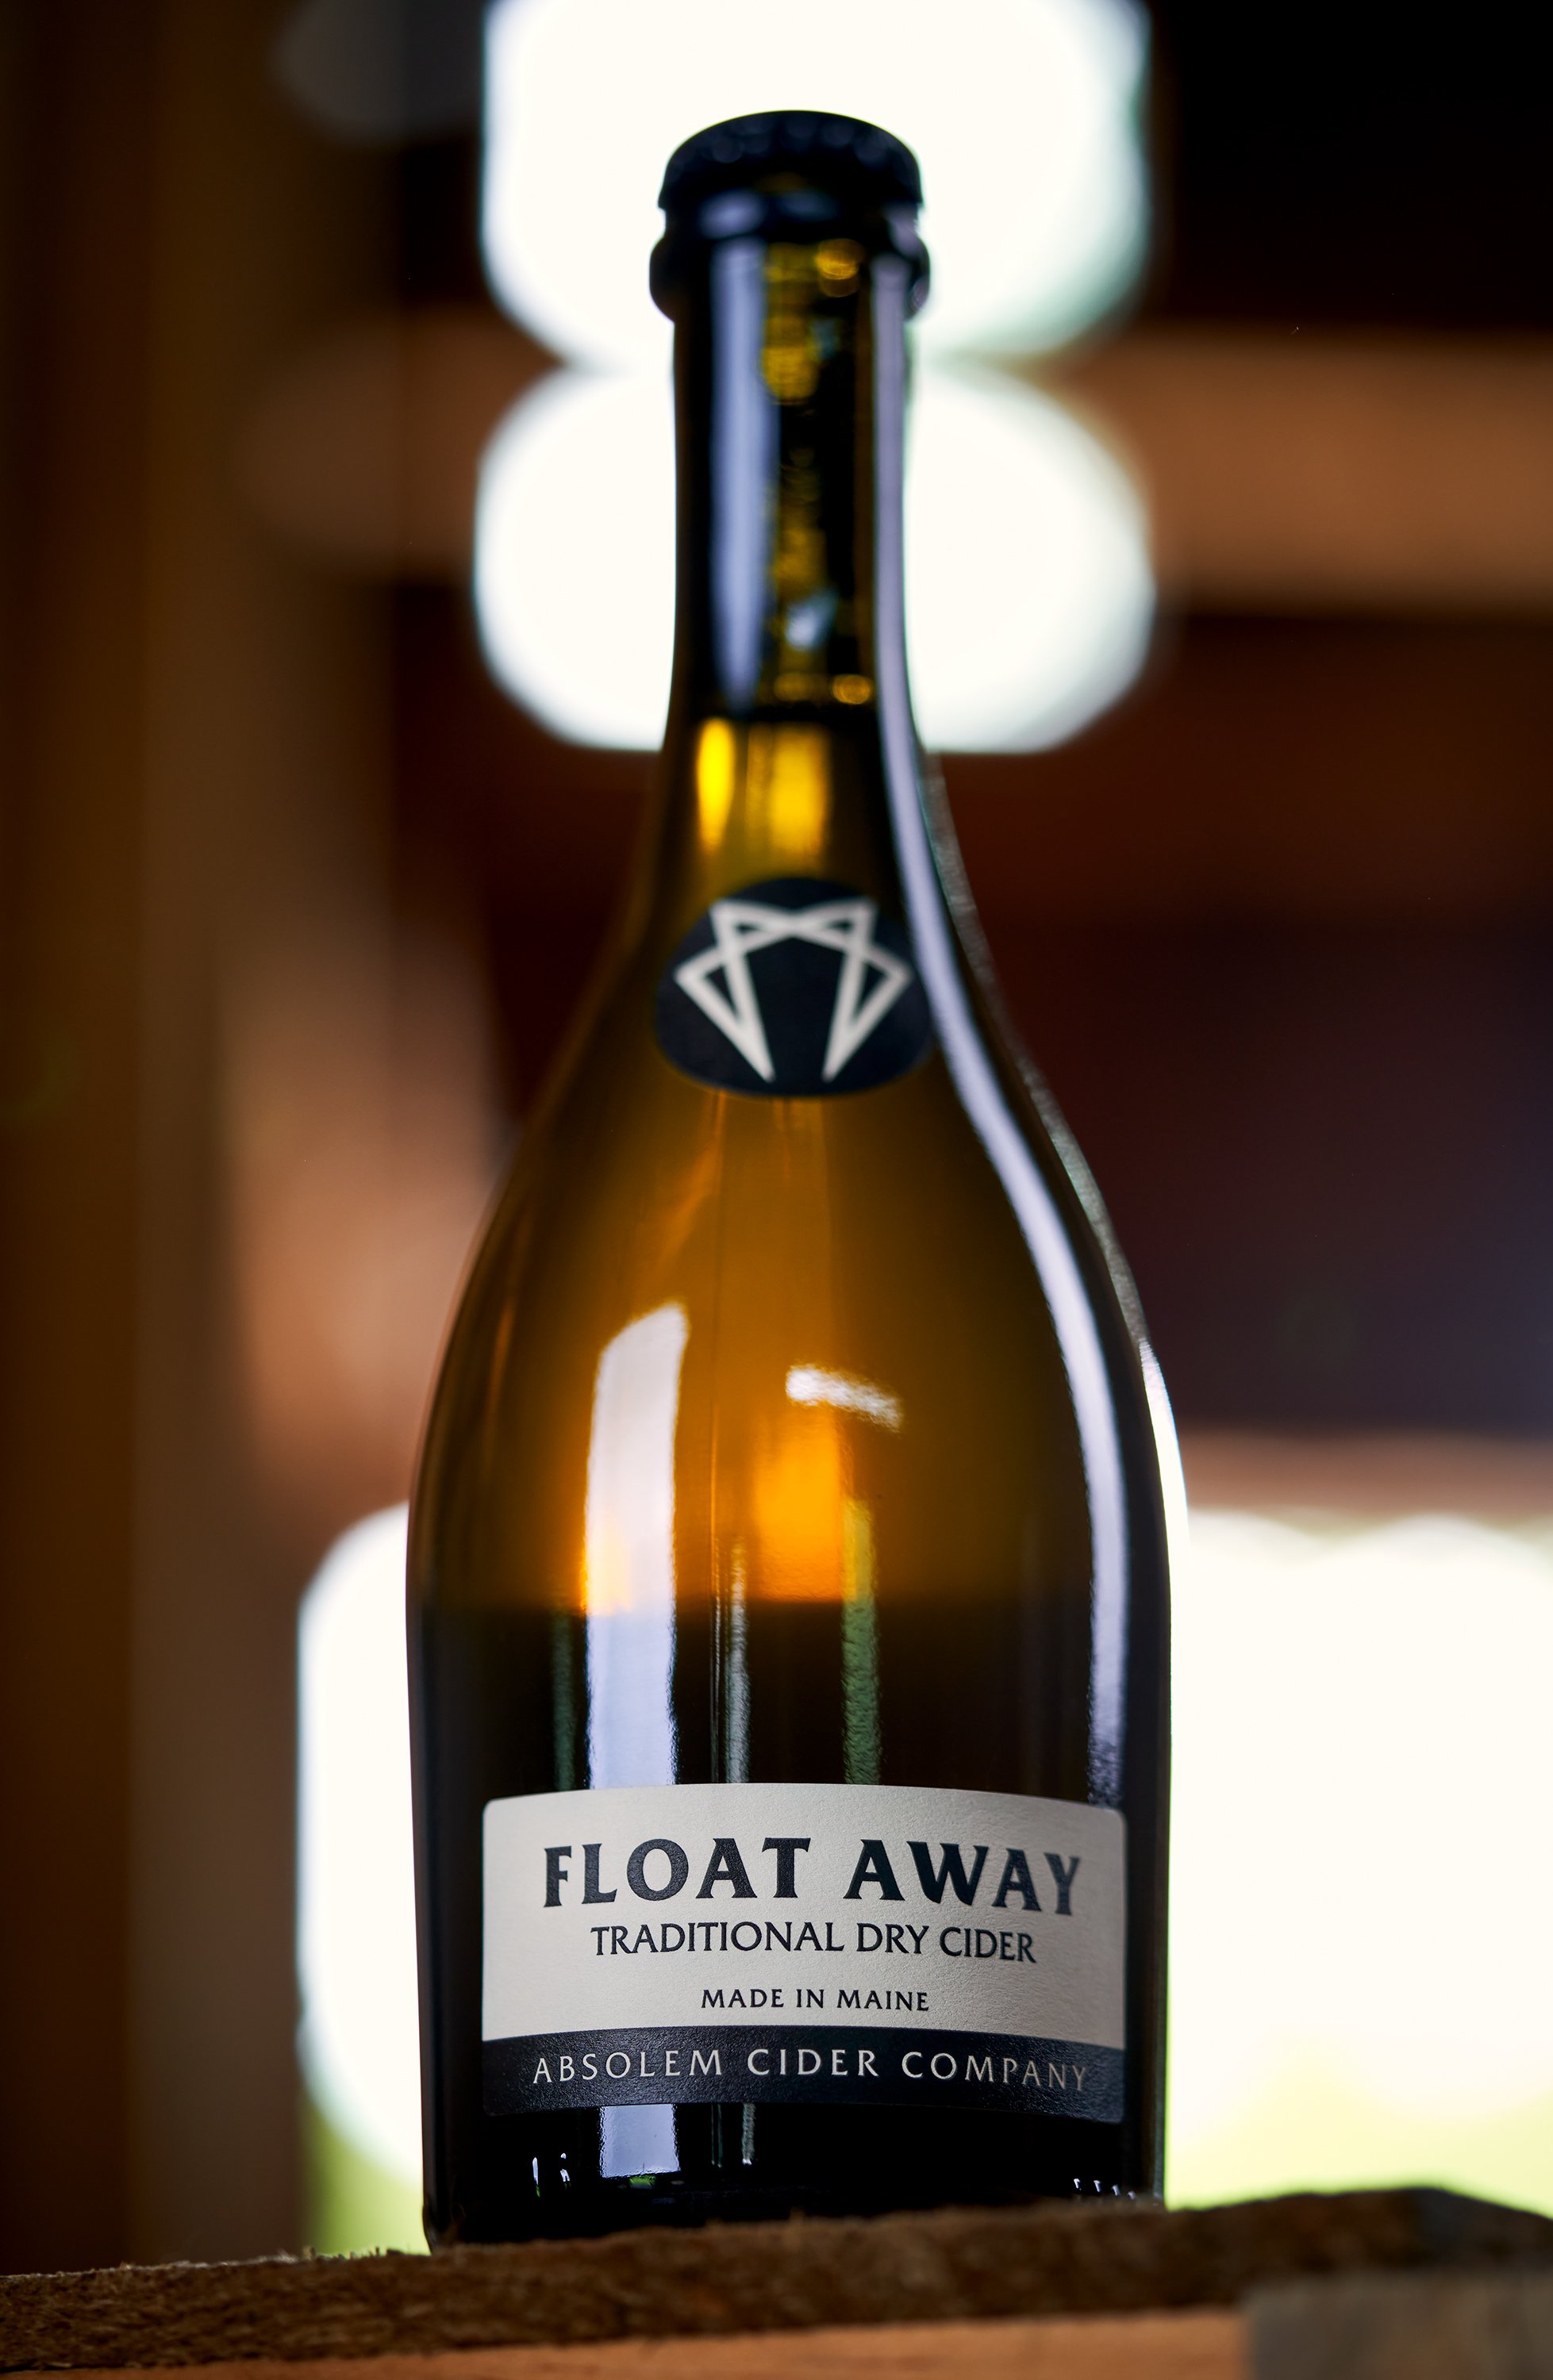 Absolem Cider, Float Away, Wintrhop Maine, Product Photography